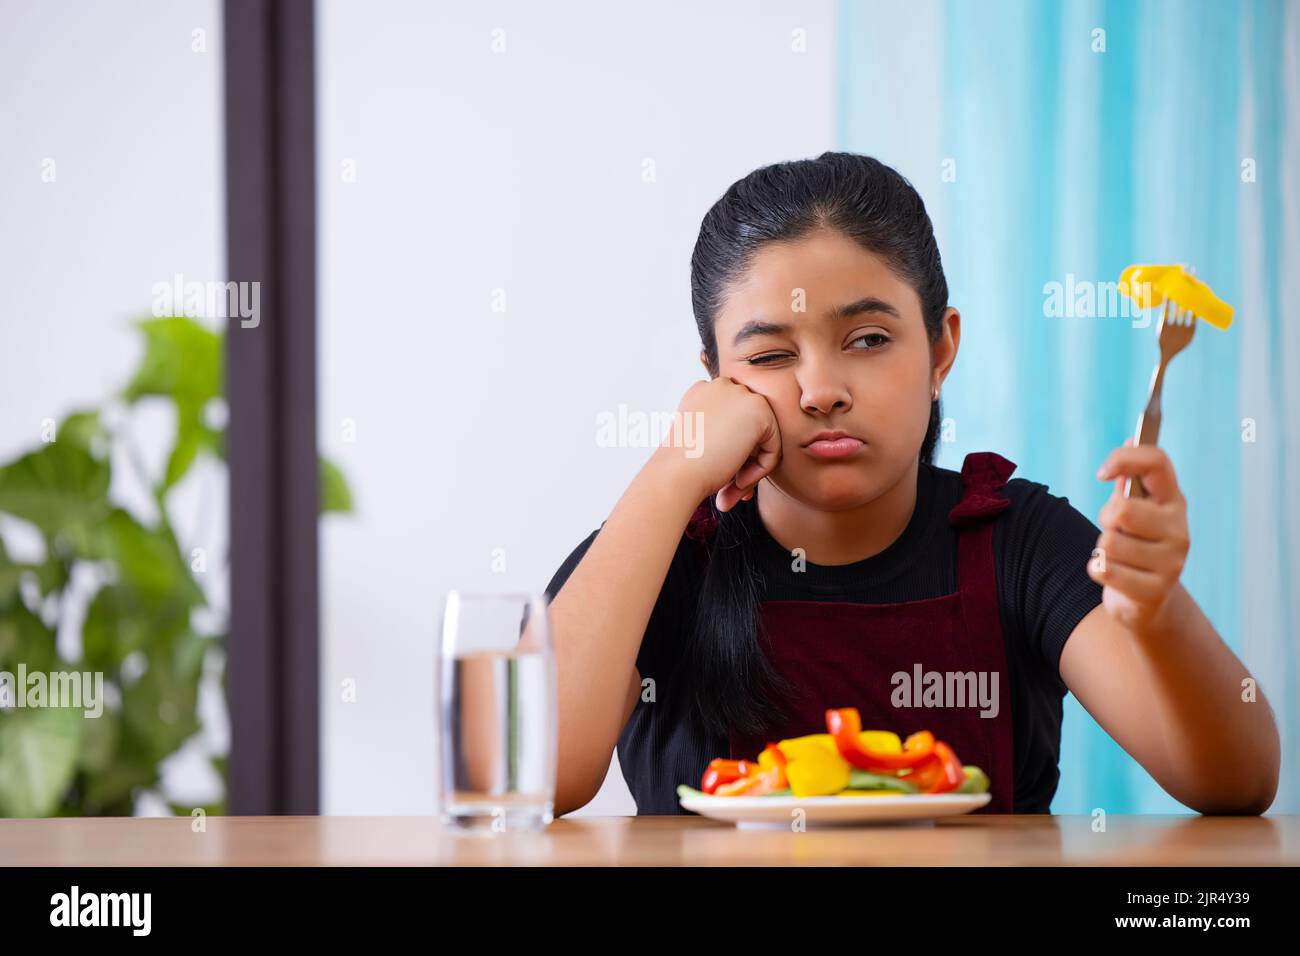 Portrait of a little girl expressing unhappiness over a plate of vegetable salad Stock Photo